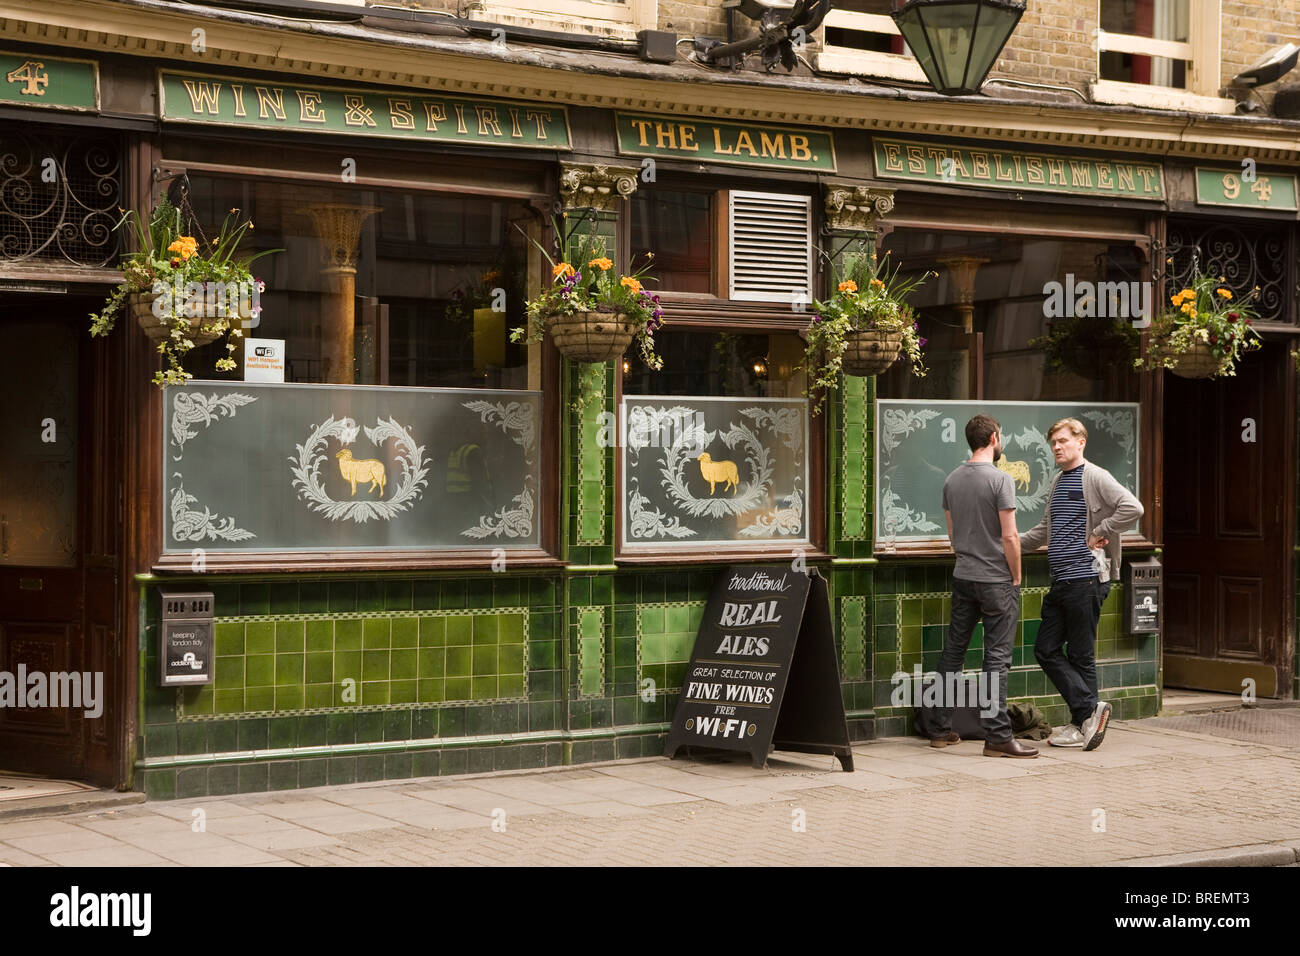 The Lamb a traditional pub in central London run byYoungs Britain's well known real ale brewer Stock Photo